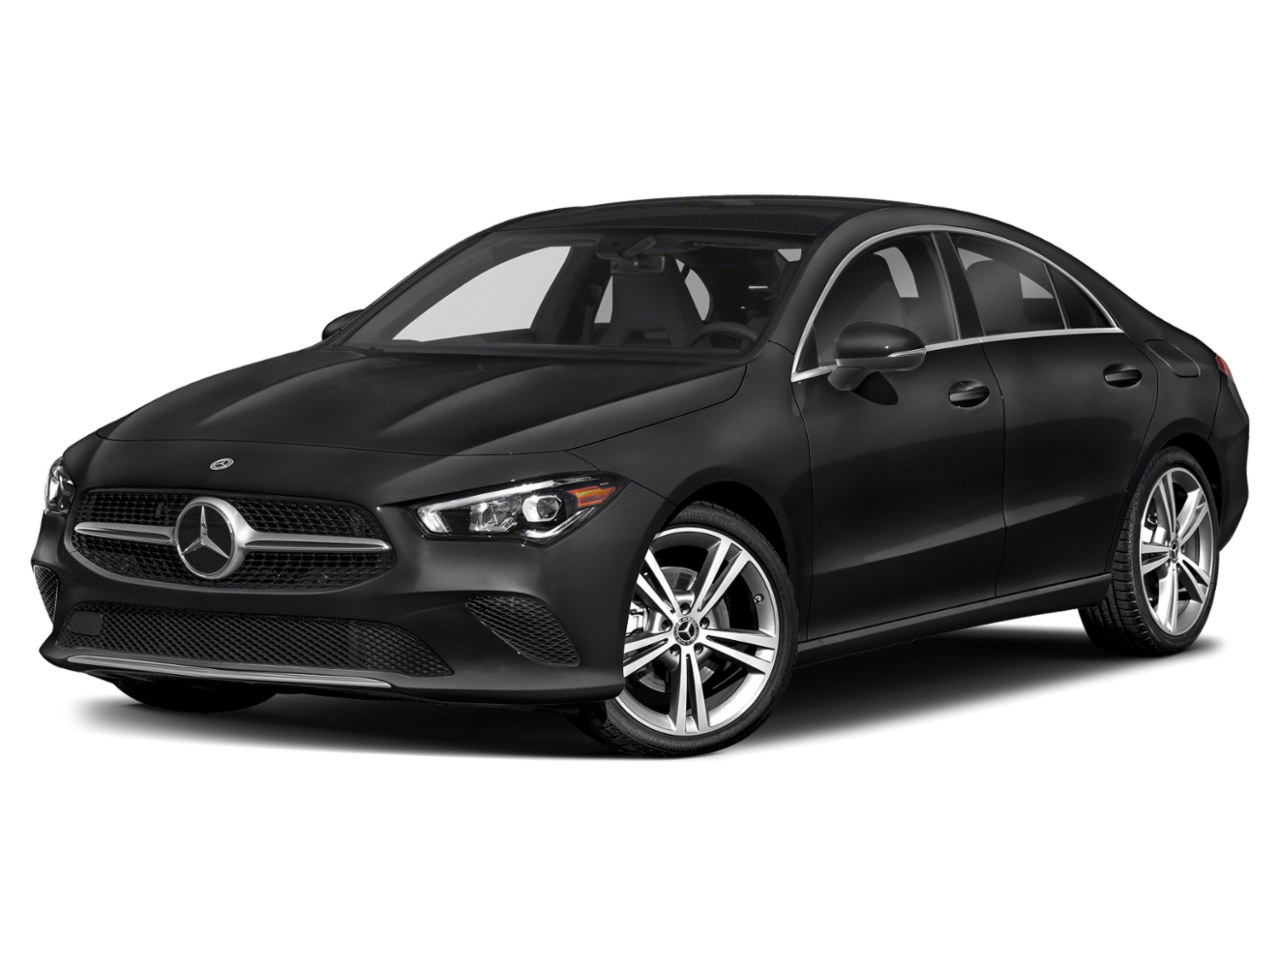 2021 Mercedes-Benz CLA lease $819 Mo $0 Down Leases Available